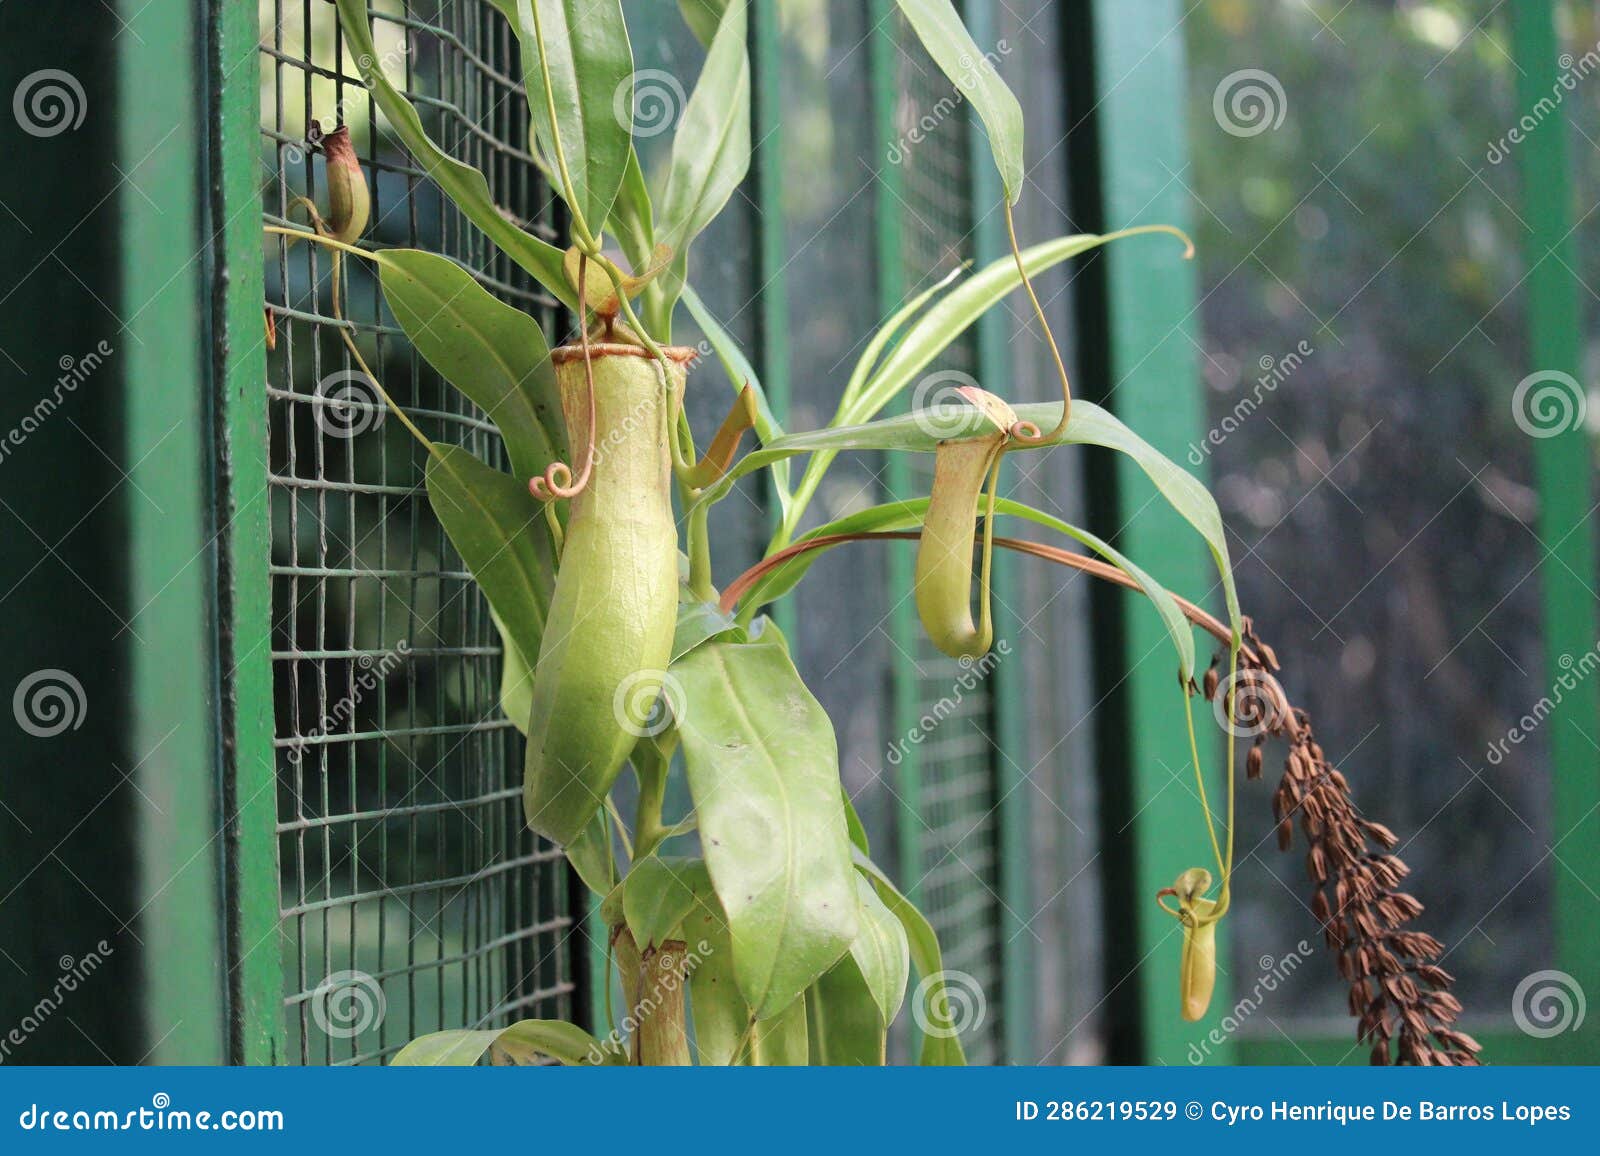 nephentes tropical carnivore pitcher plantphoto,nepenthes mirabilis, asian species, introduced species